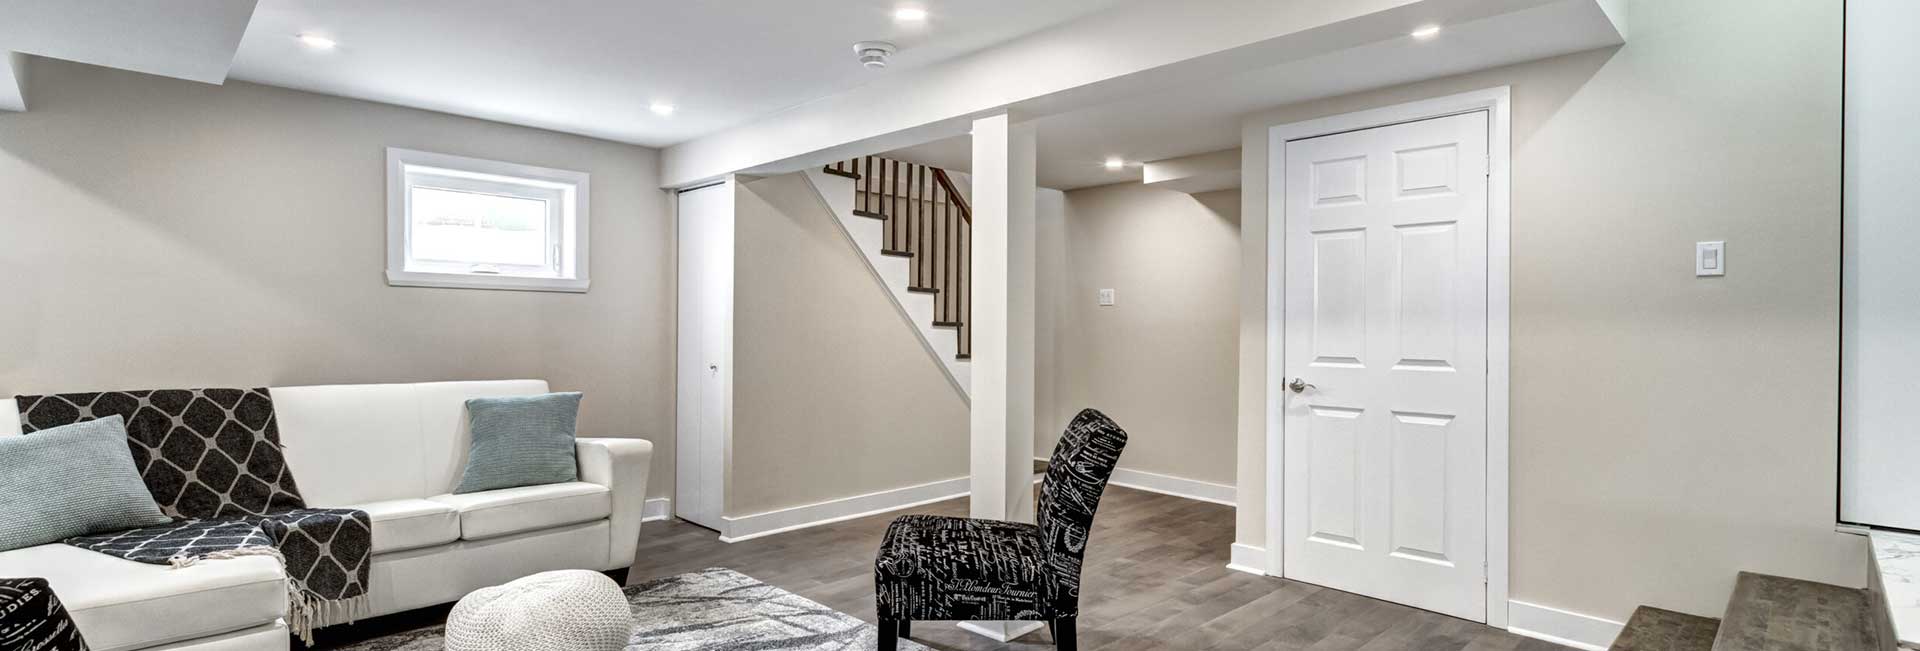 Transform Your Basement into Usable Space